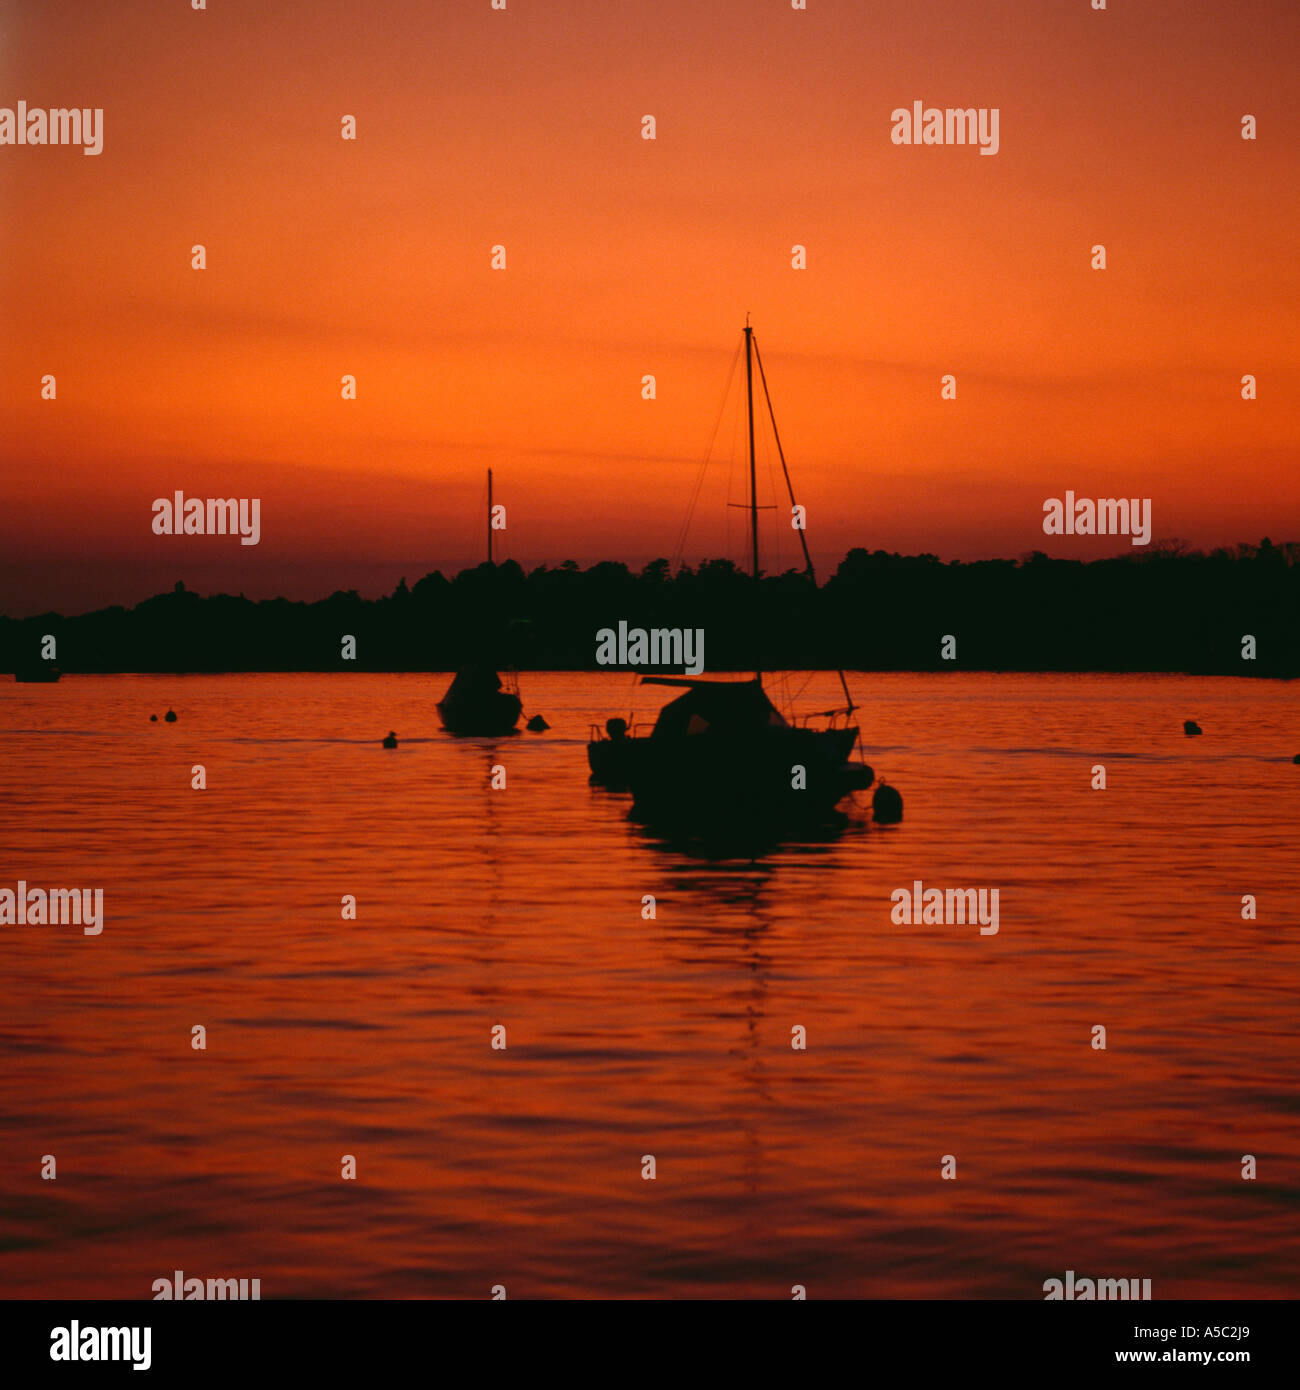 Moored yachts silhouetted against afterglow from sunset, Oulton Broad, Suffolk, UK. Stock Photo